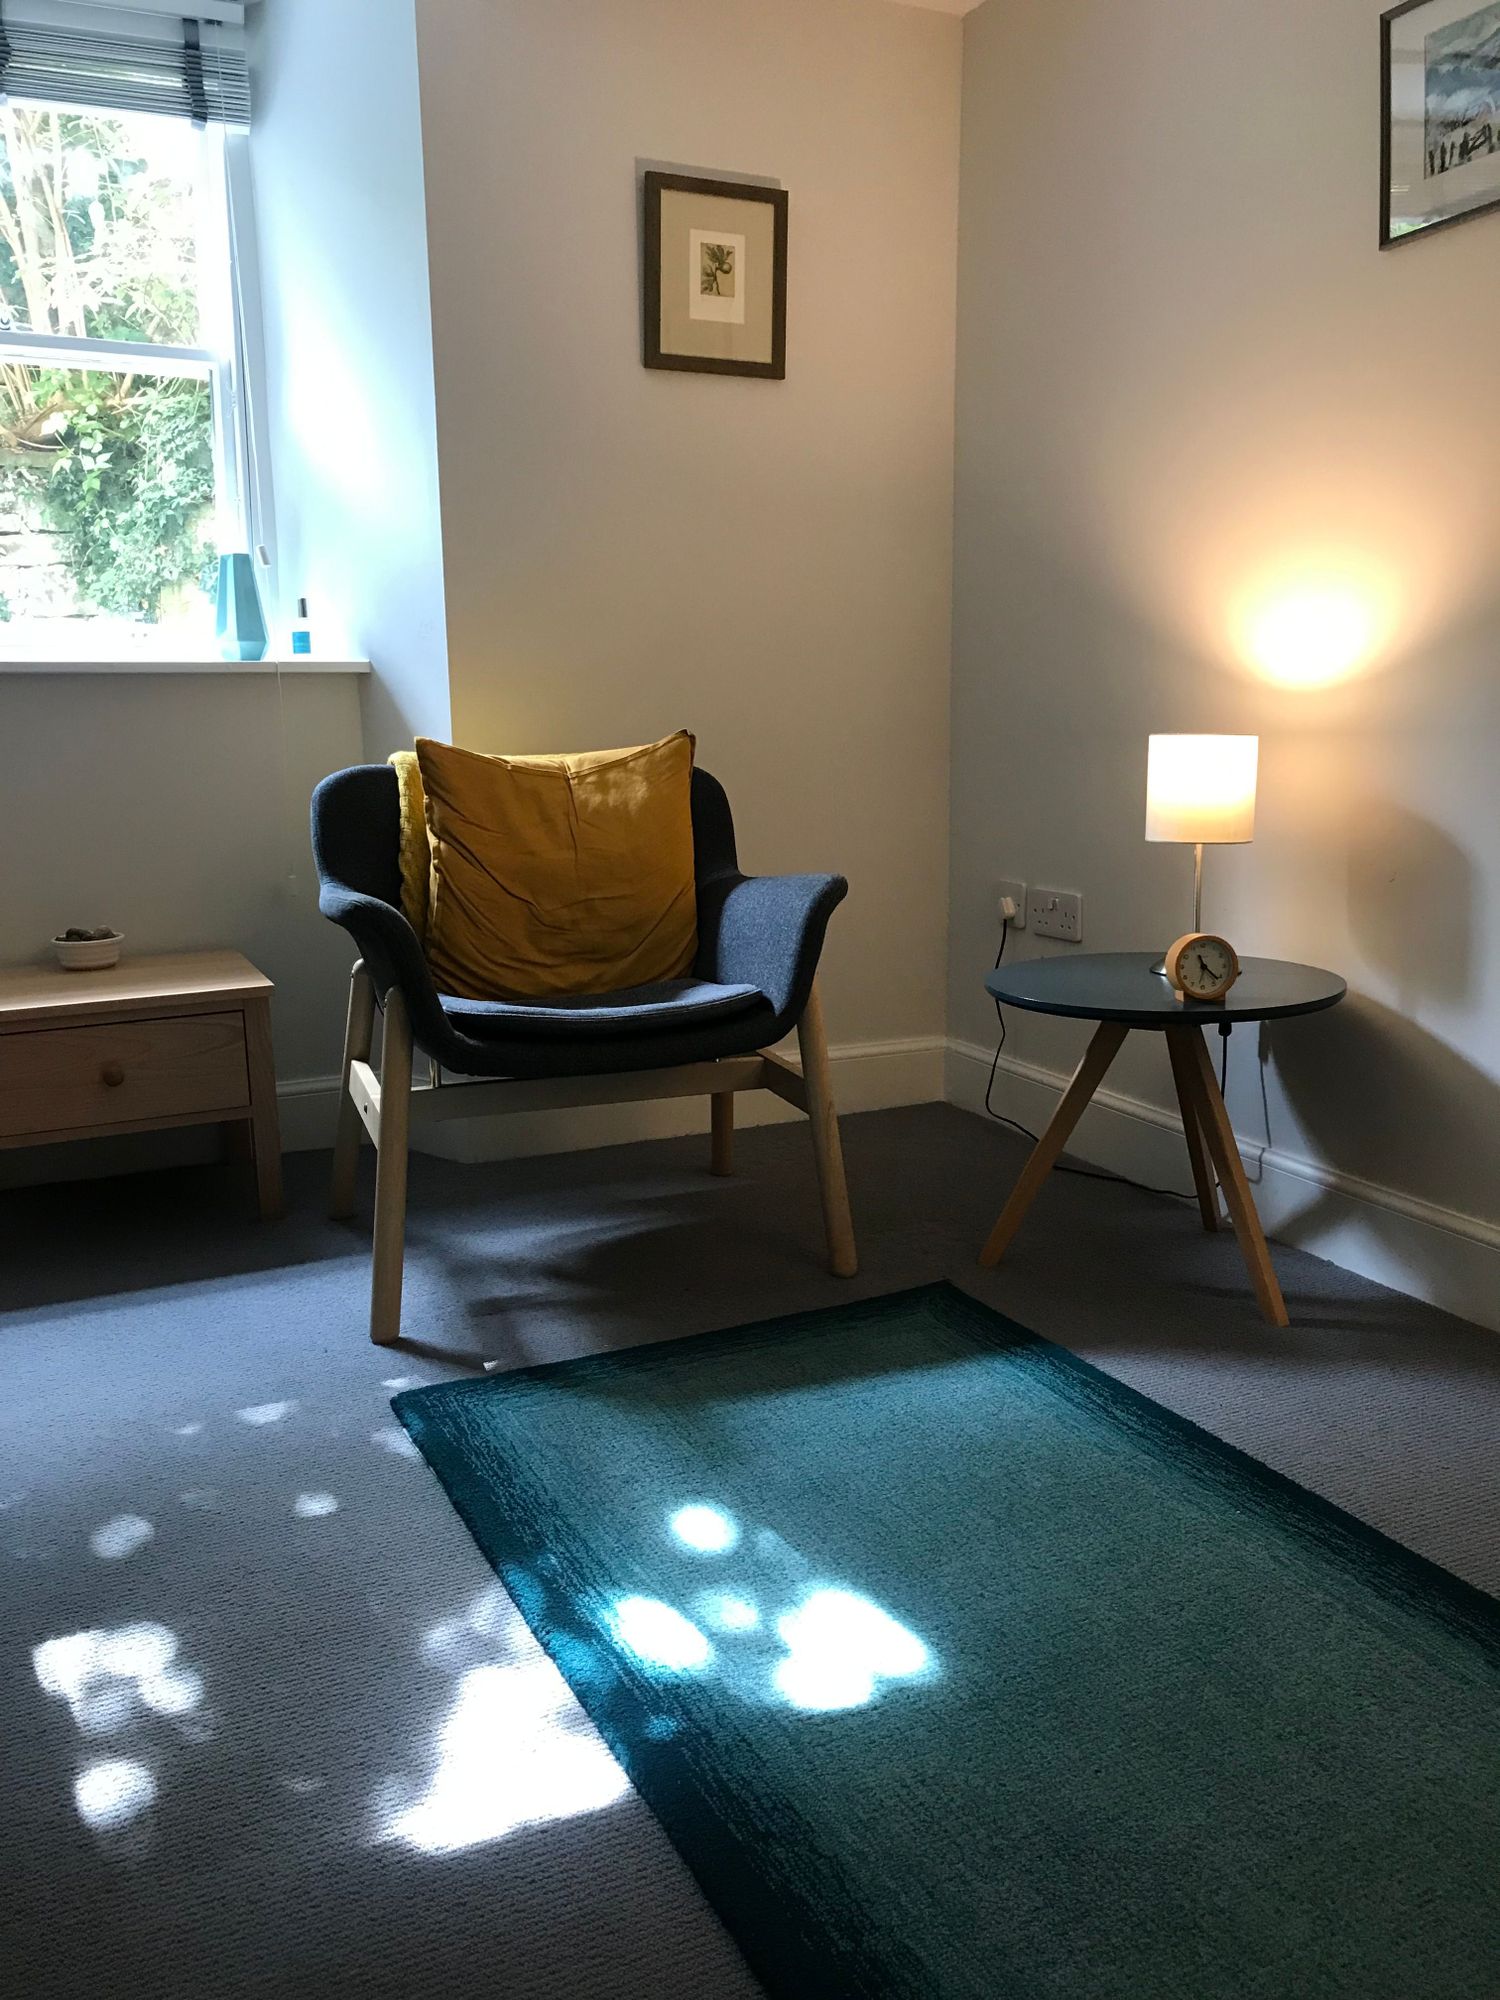 Gallery Photo of Photograph of one of the consulting rooms I use at The Next Chapter.